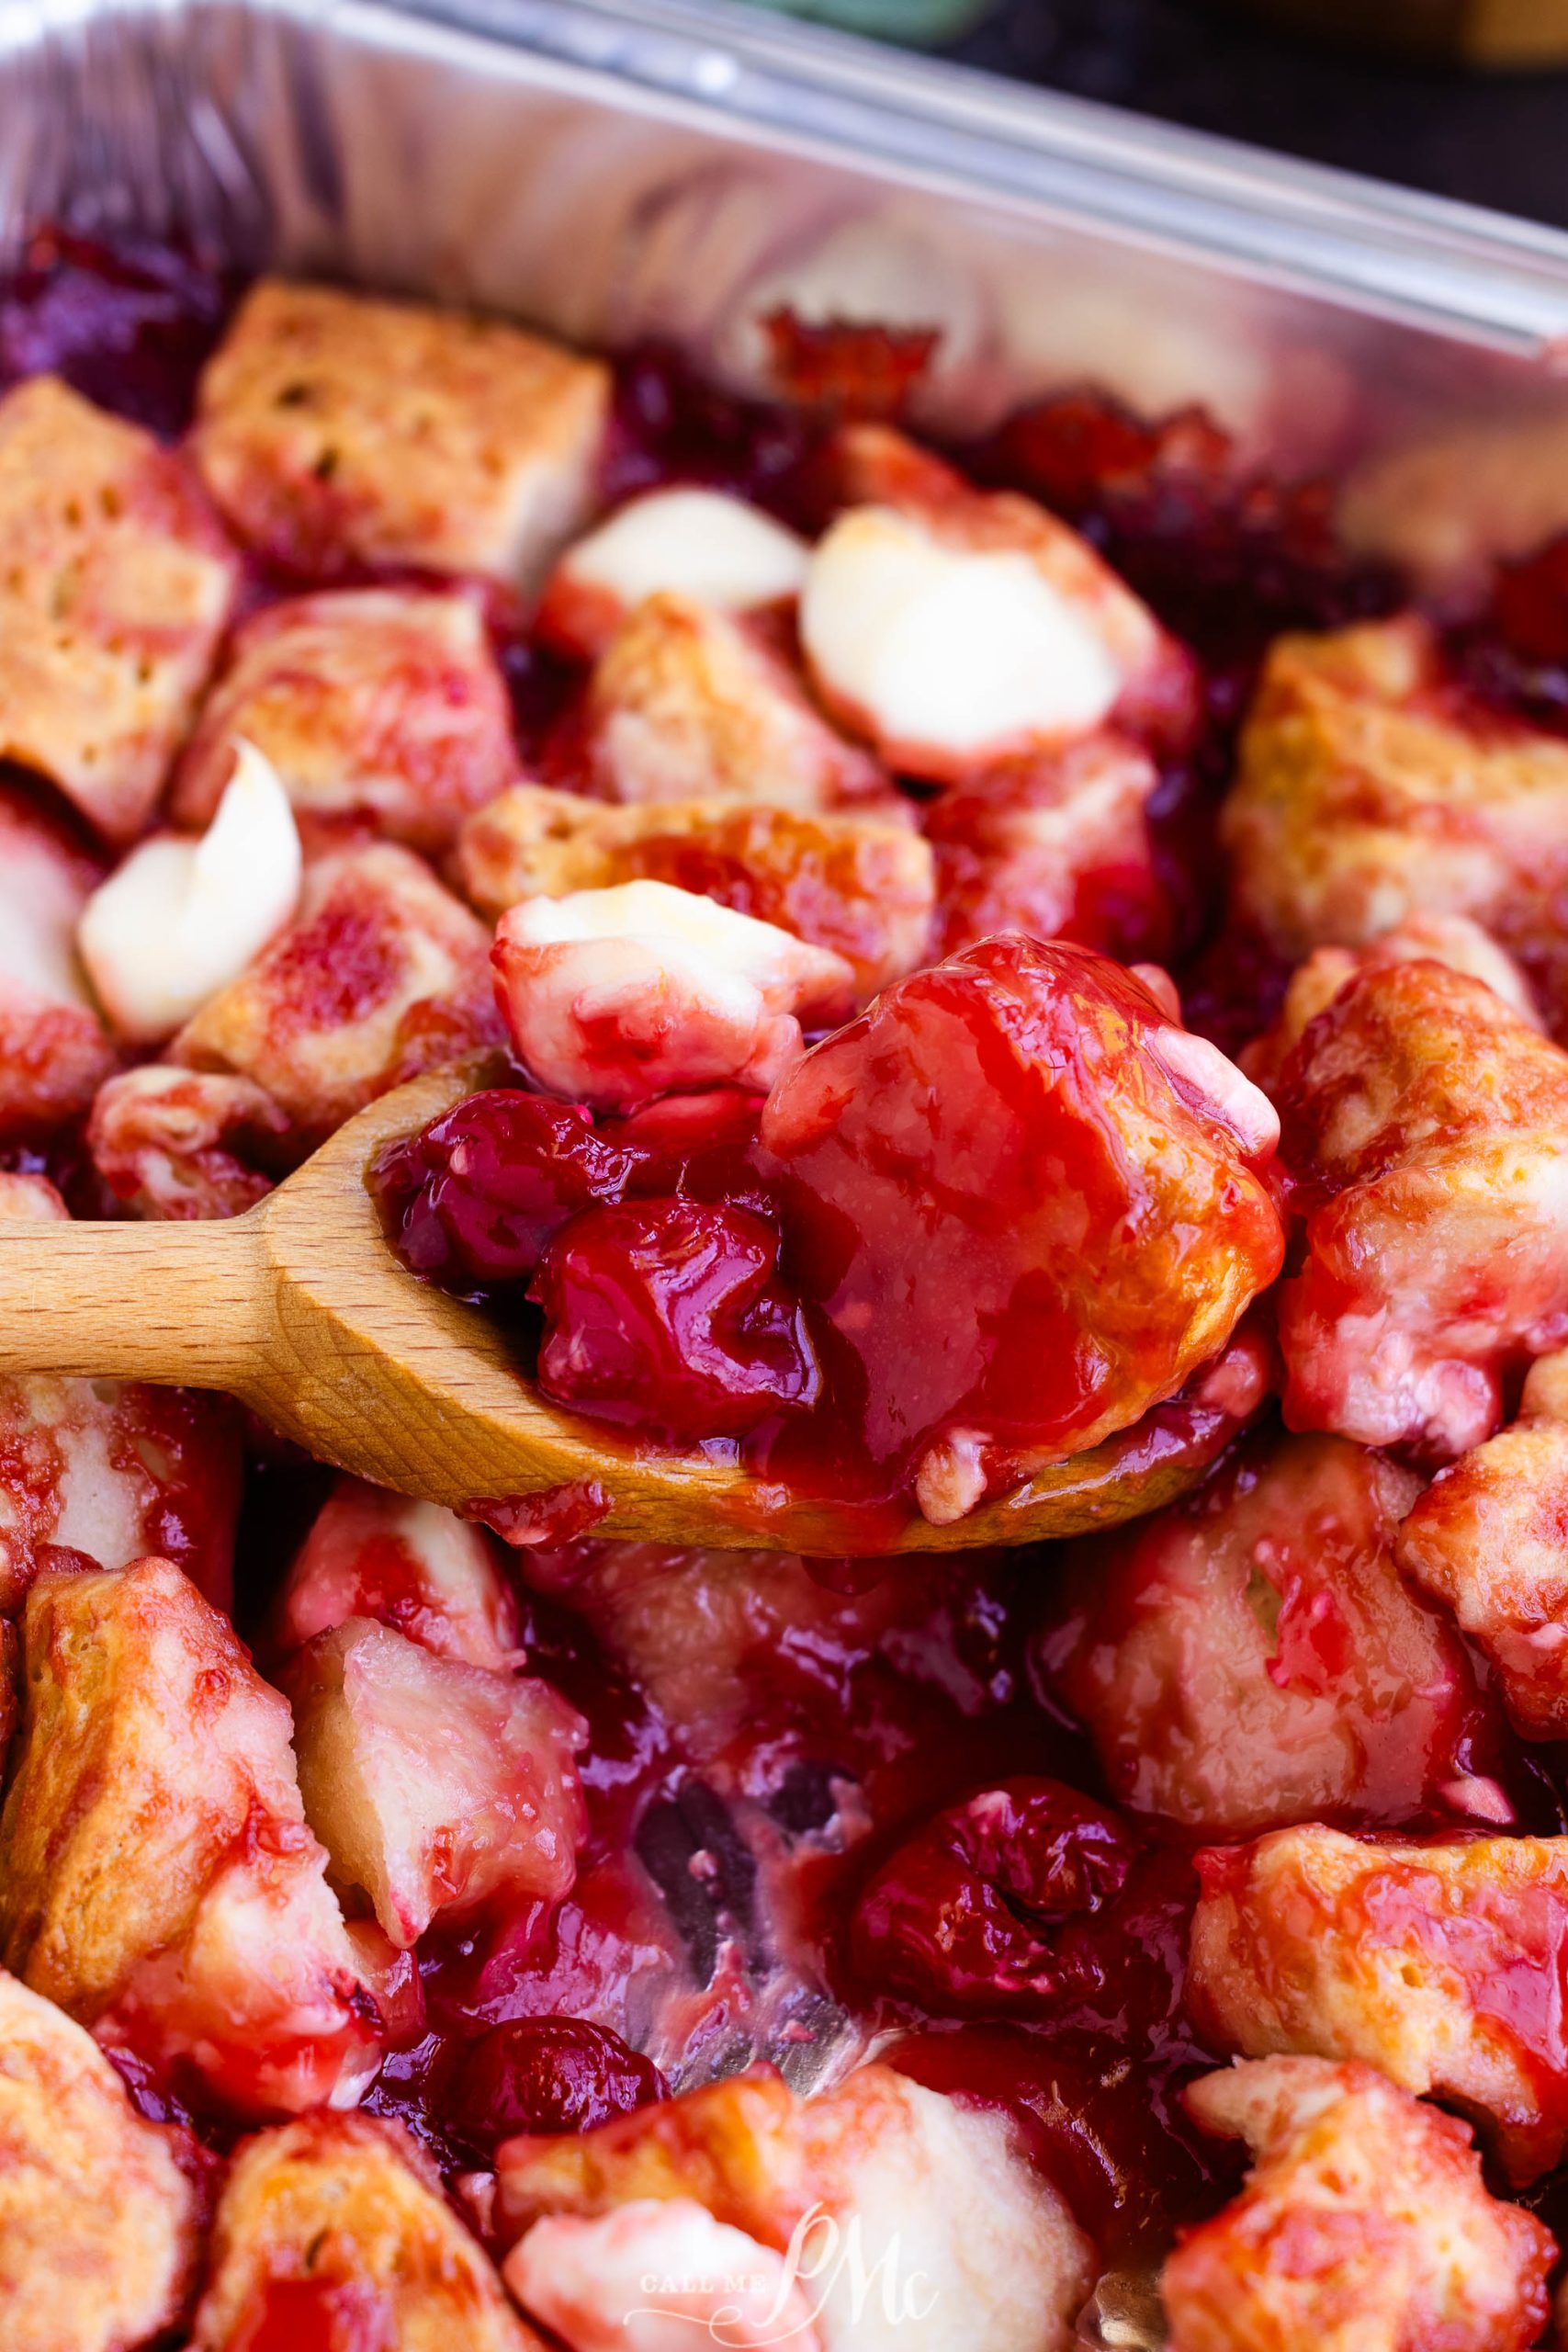 A close-up of a wooden spoon scooping a piece of cherry bread pudding from a pan. The pudding contains visible cherries and custard-soaked bread cubes.